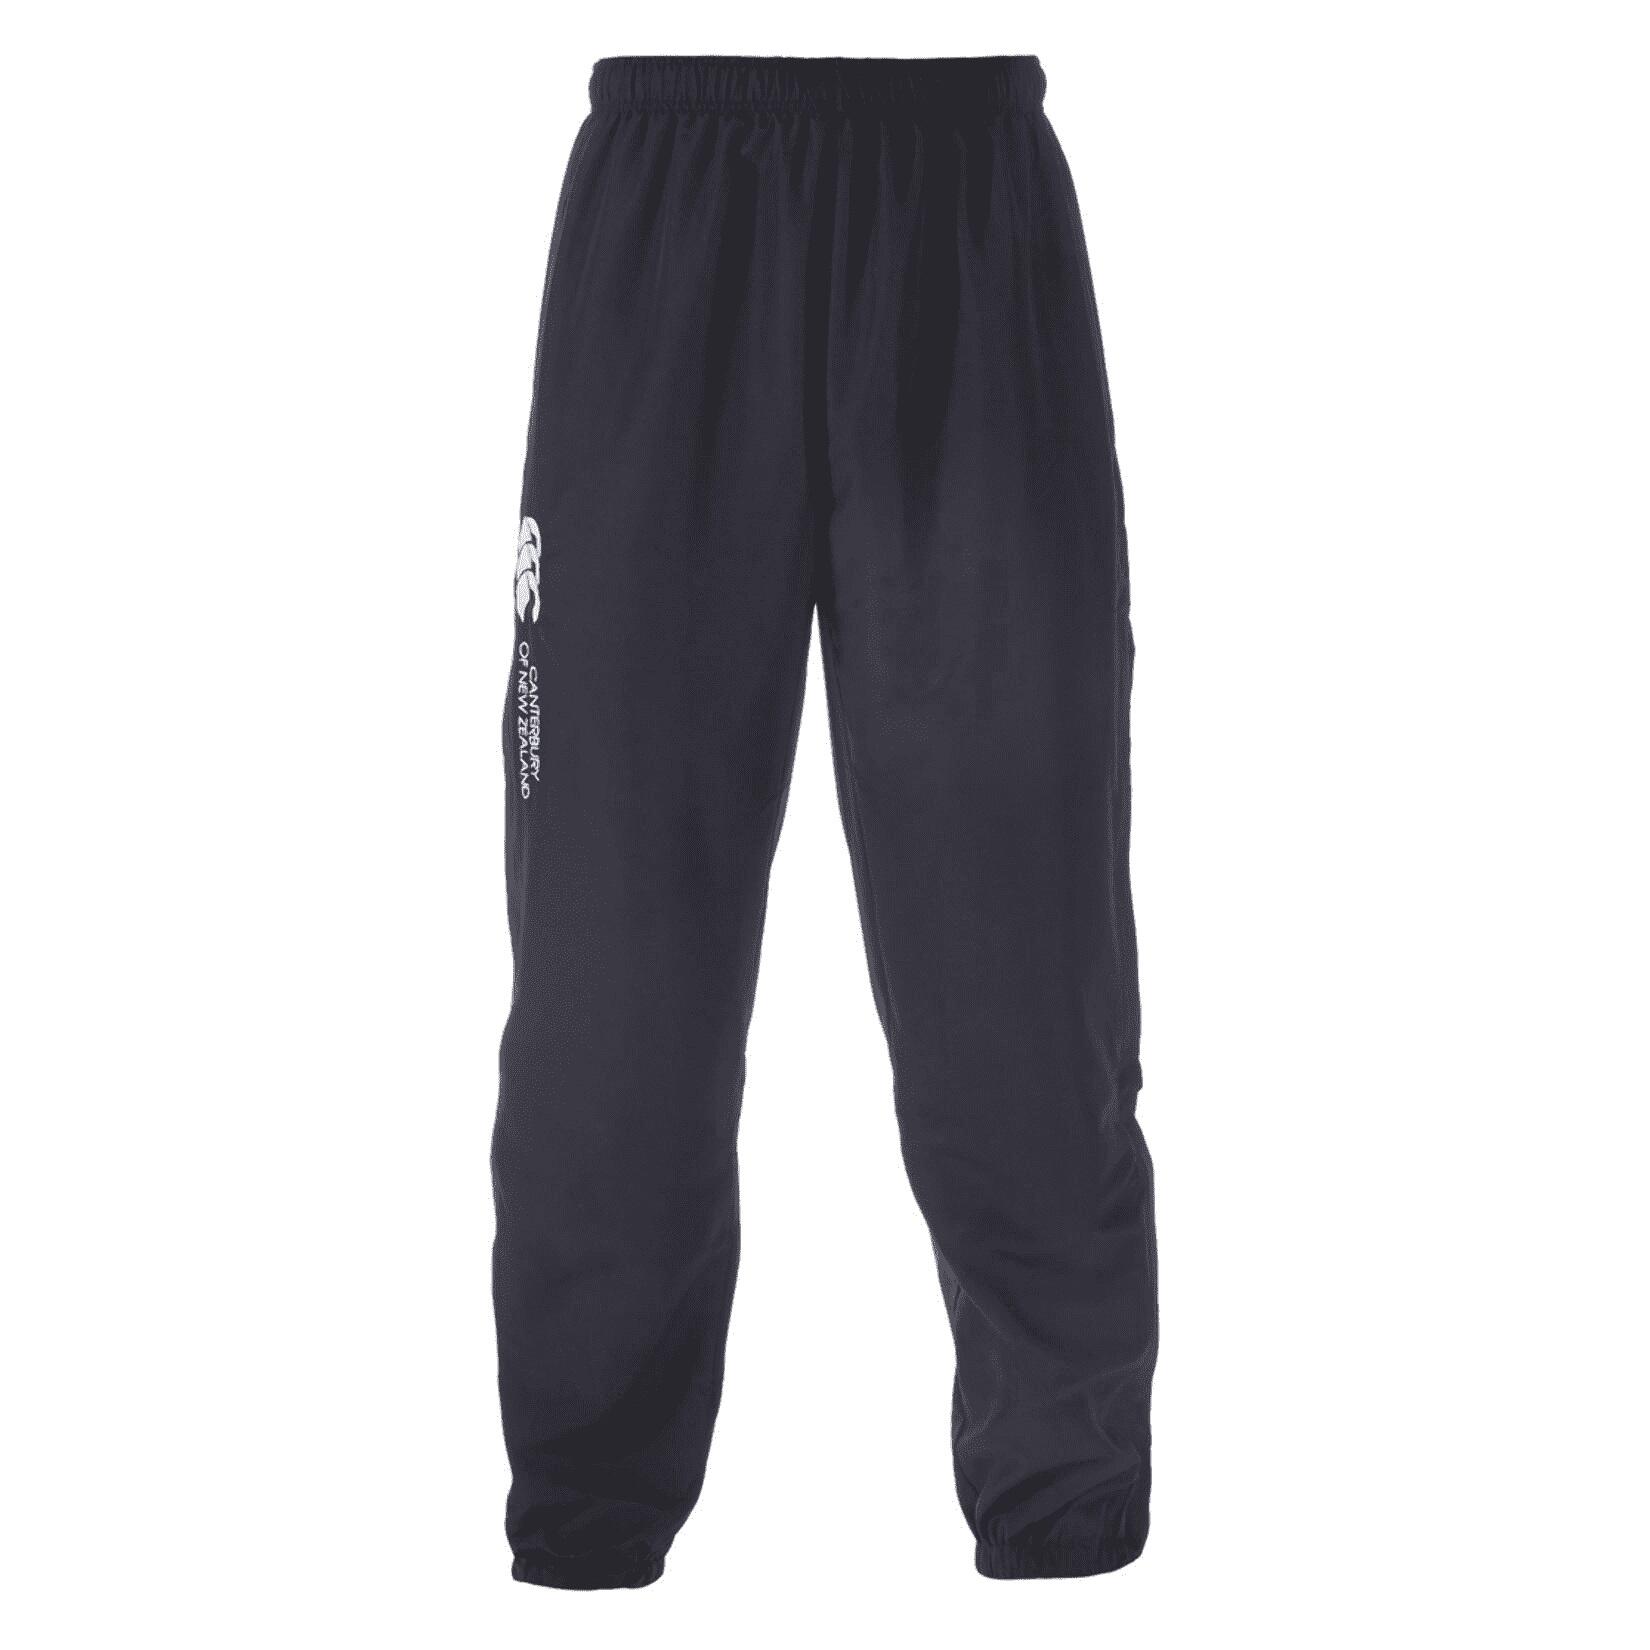 CANTERBURY Childrens/Kids Cuffed Ankle Tracksuit Bottoms (Navy)